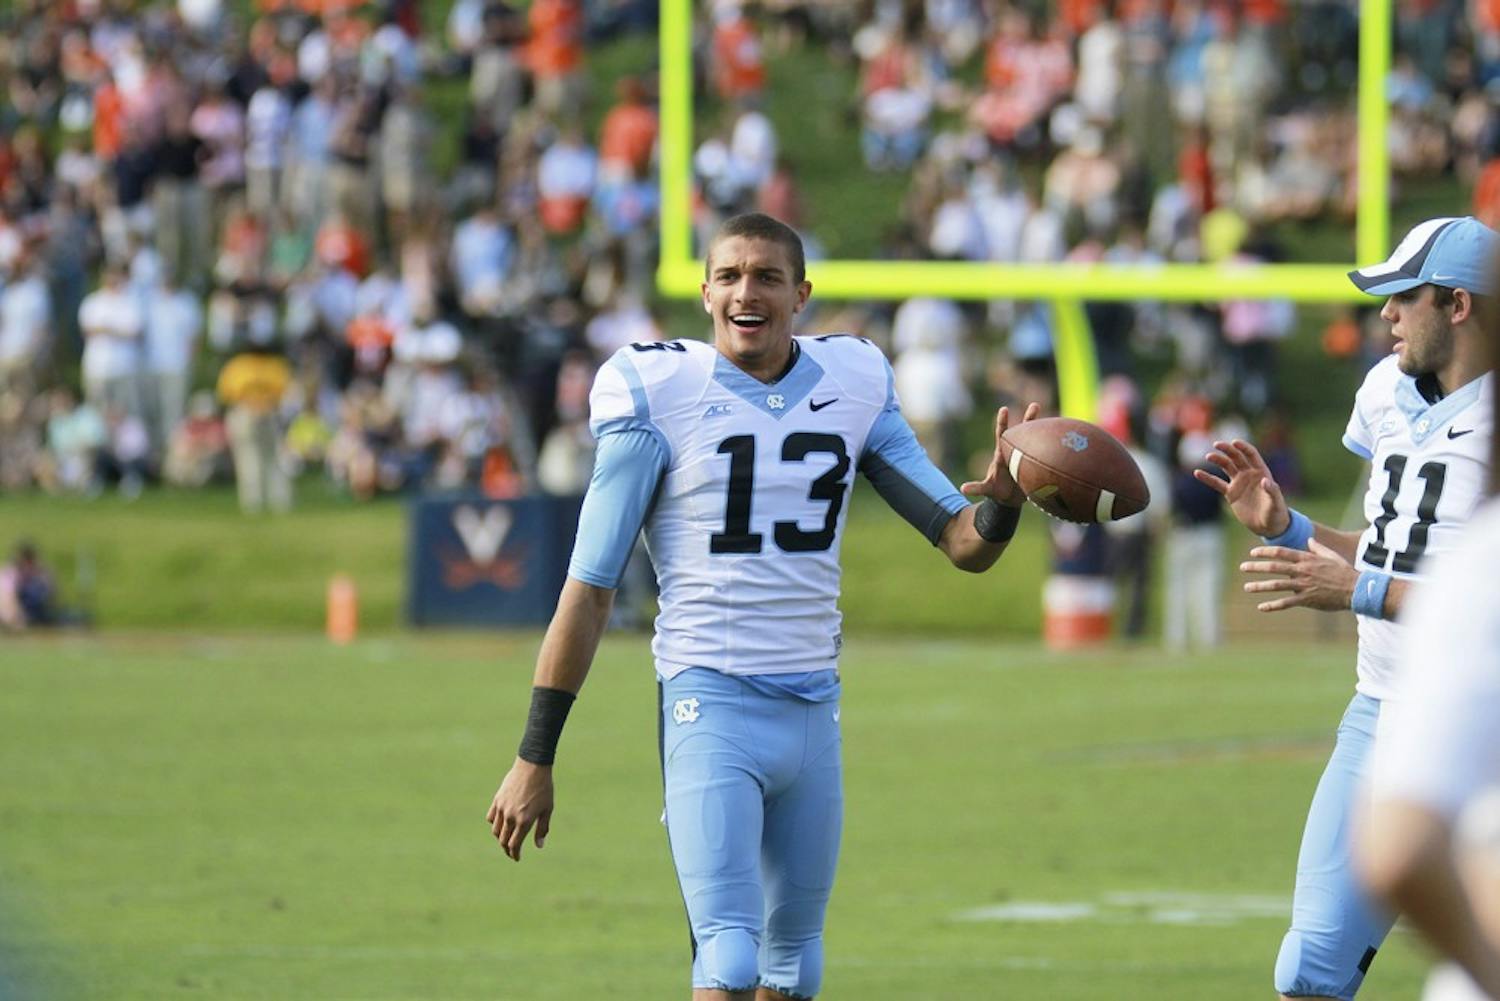 Former walk-on Mack Hollins led the Tar Heels in their match Saturday against the University of Virginia.  Hollins finished with two touchdowns and retrieved the ball for UNC on an onside kick recovery.